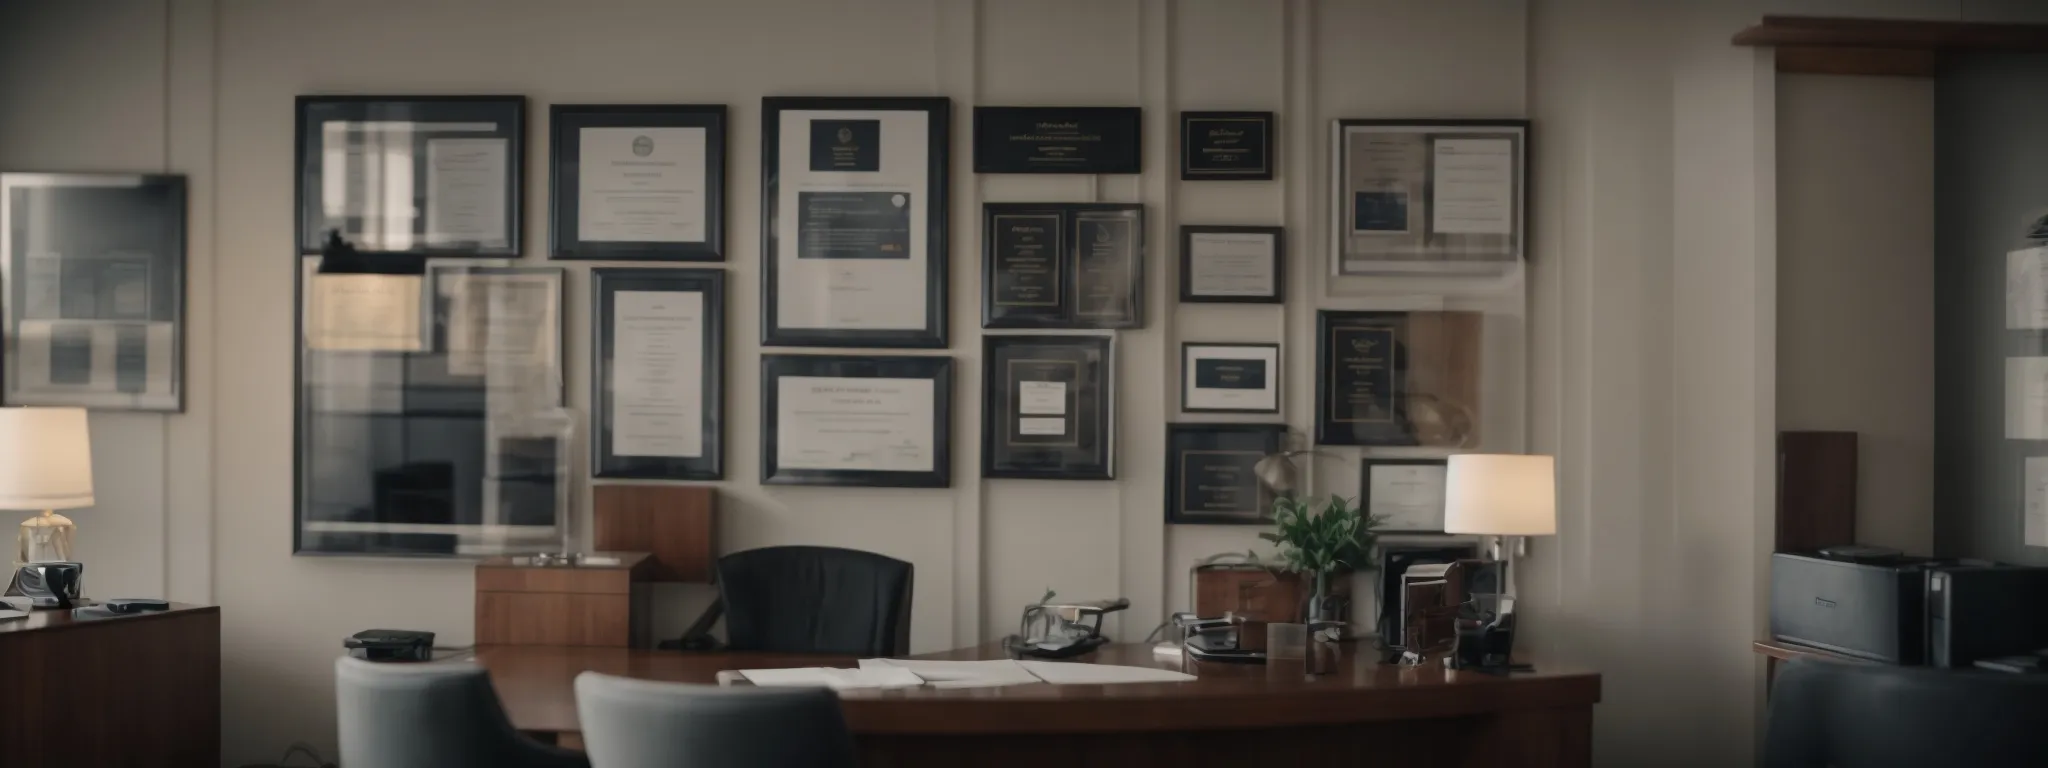 a confident financial advisor presents a secure, inviting office environment with visible diplomas and awards on the wall, symbolizing expertise and trustworthiness.